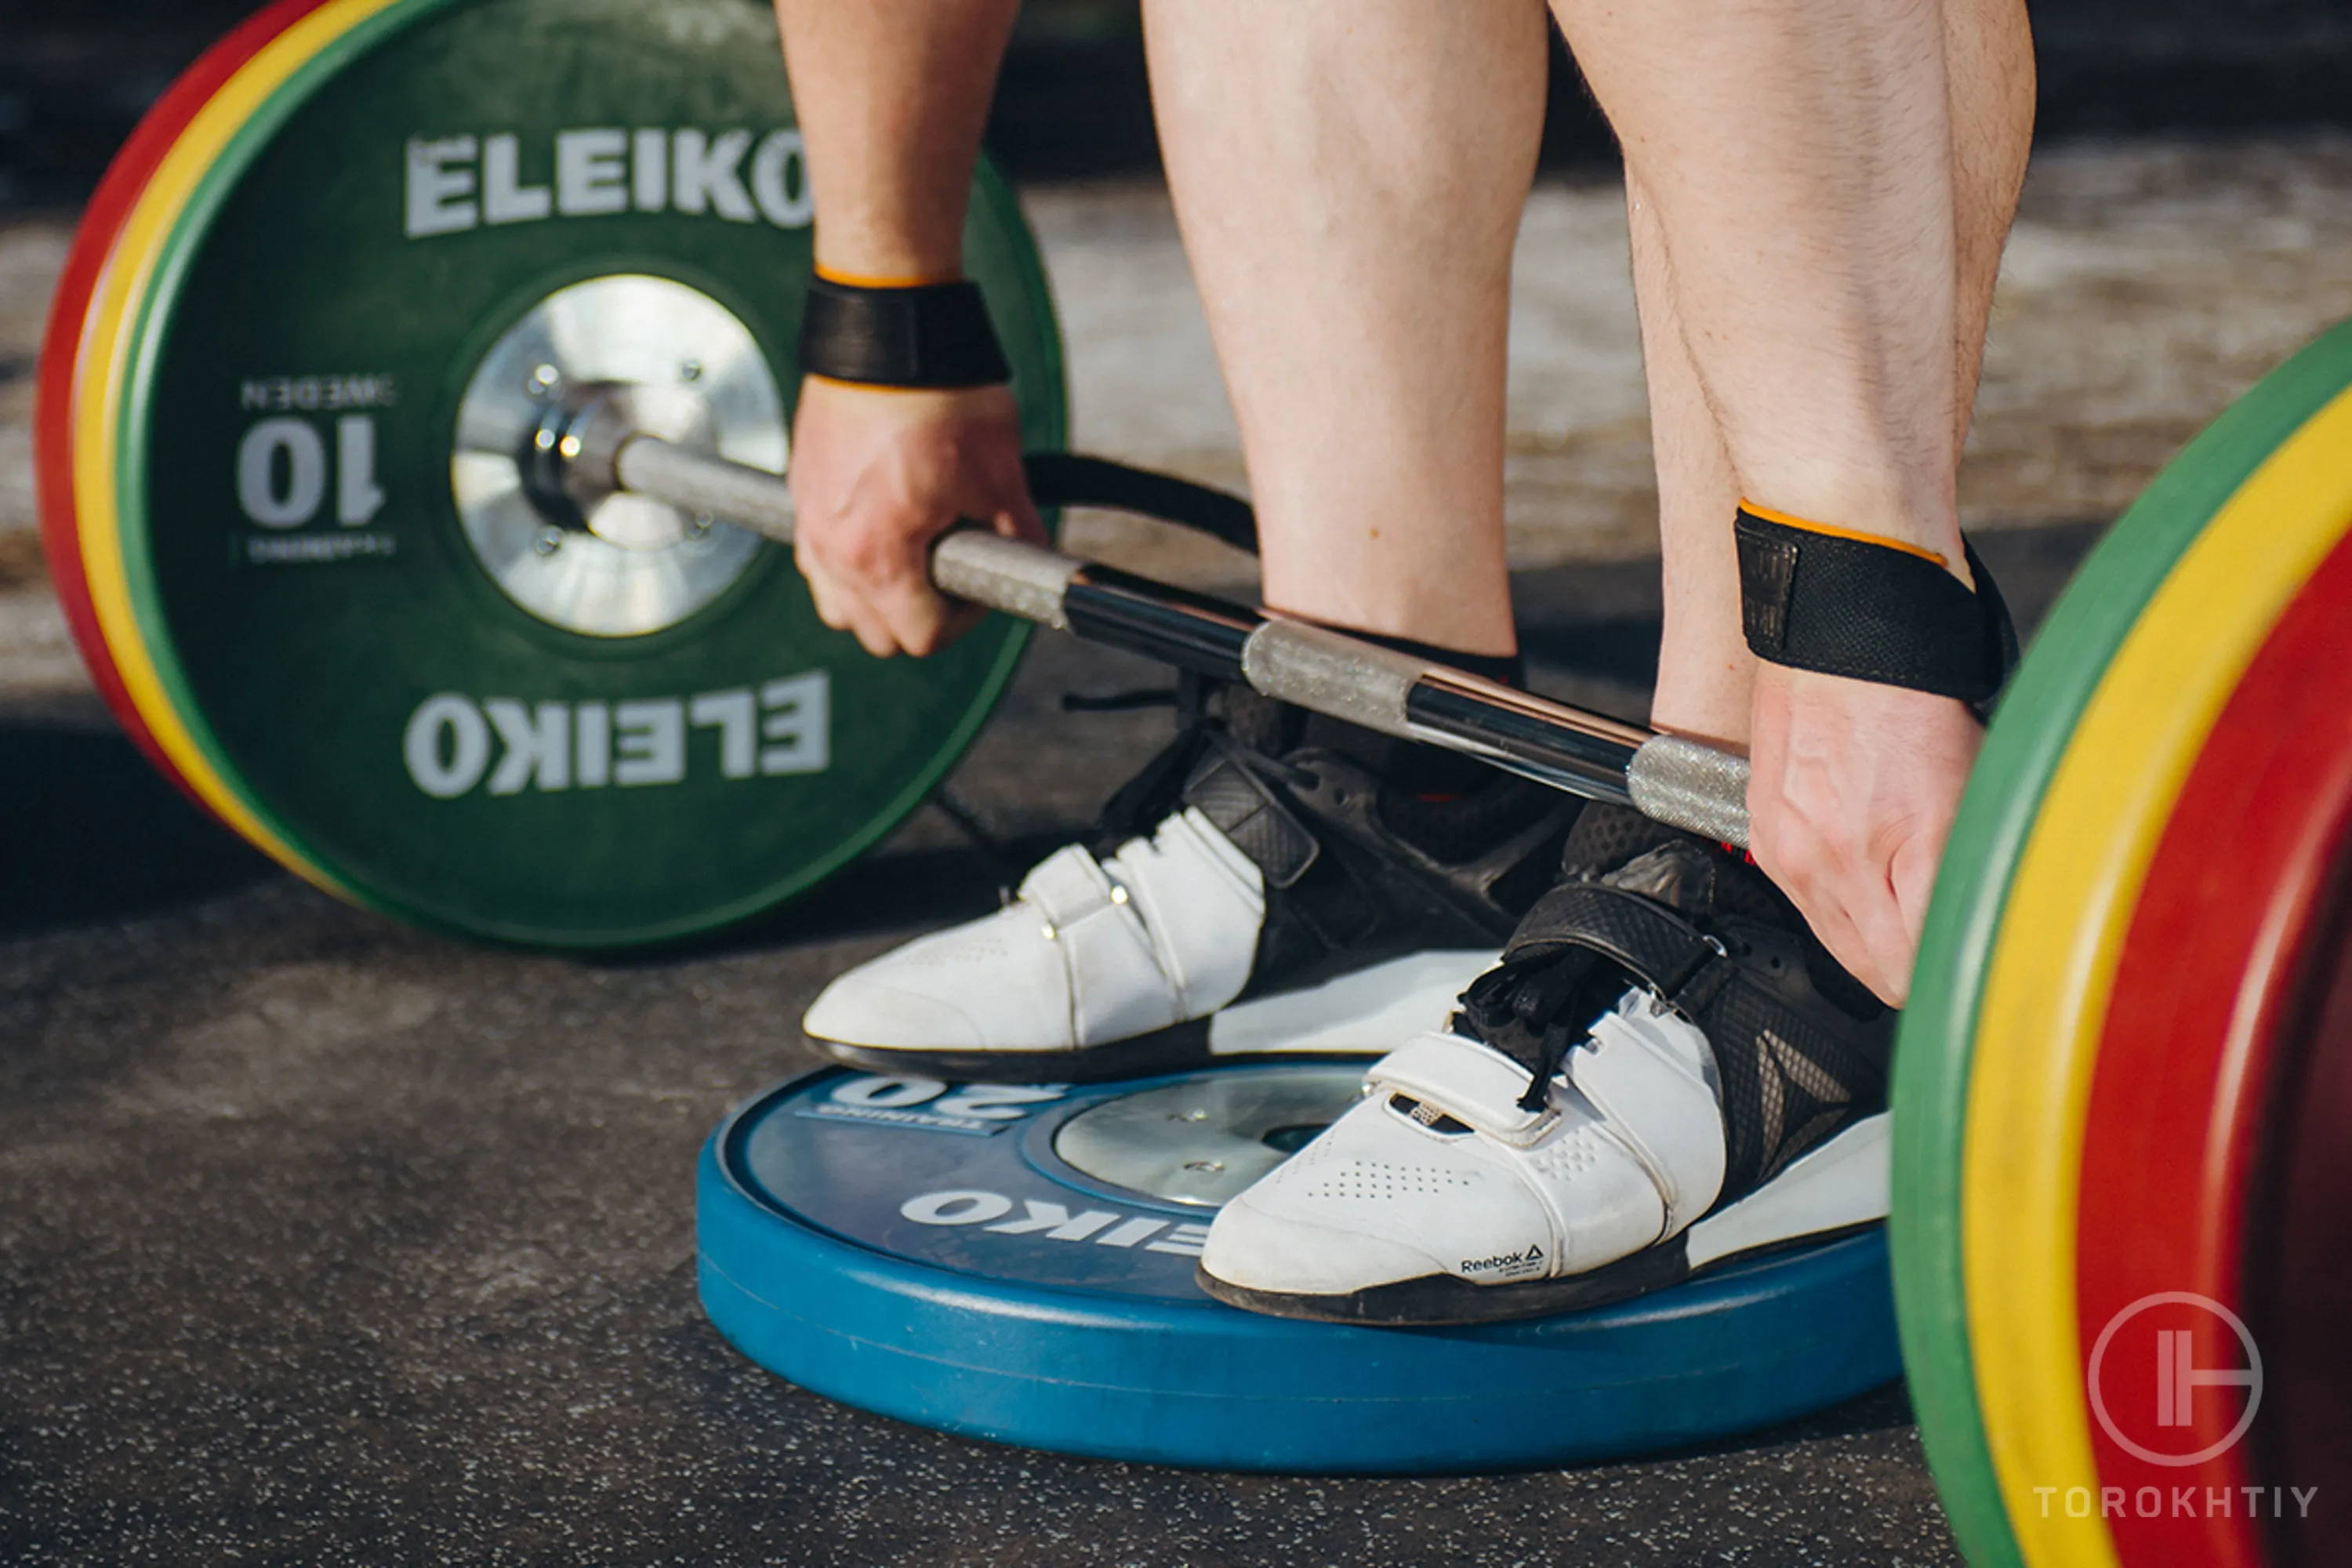 athlete is lifting in flat shoes